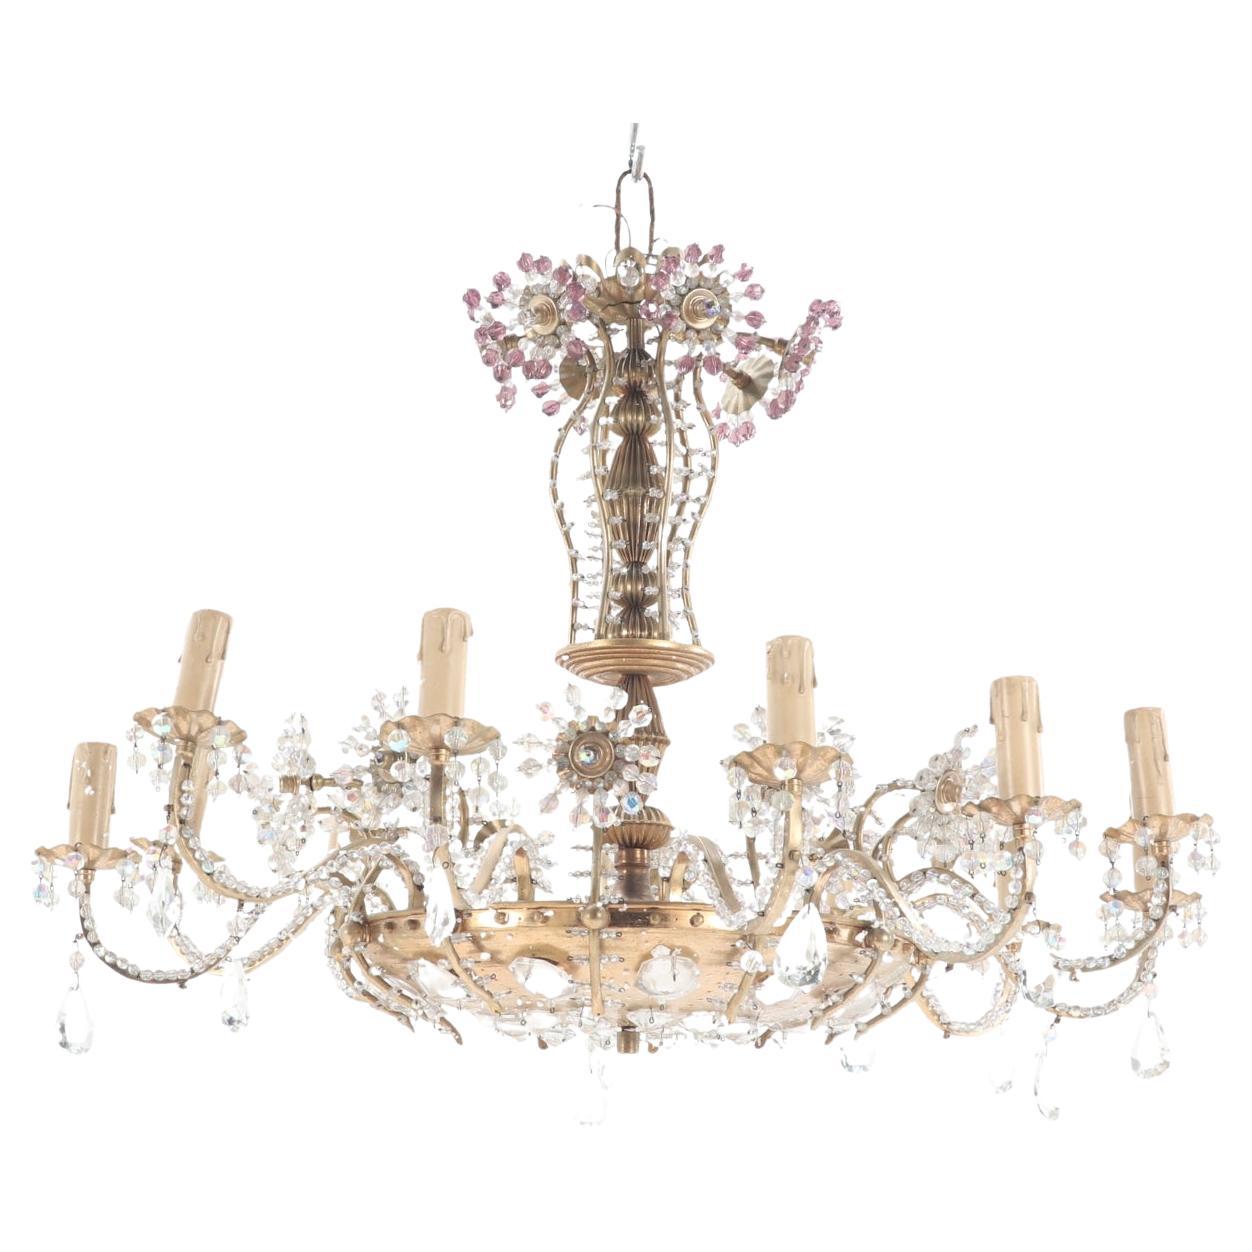 A twelve arm brass and glass beaded chandelier with amethyst beads circa 1950.